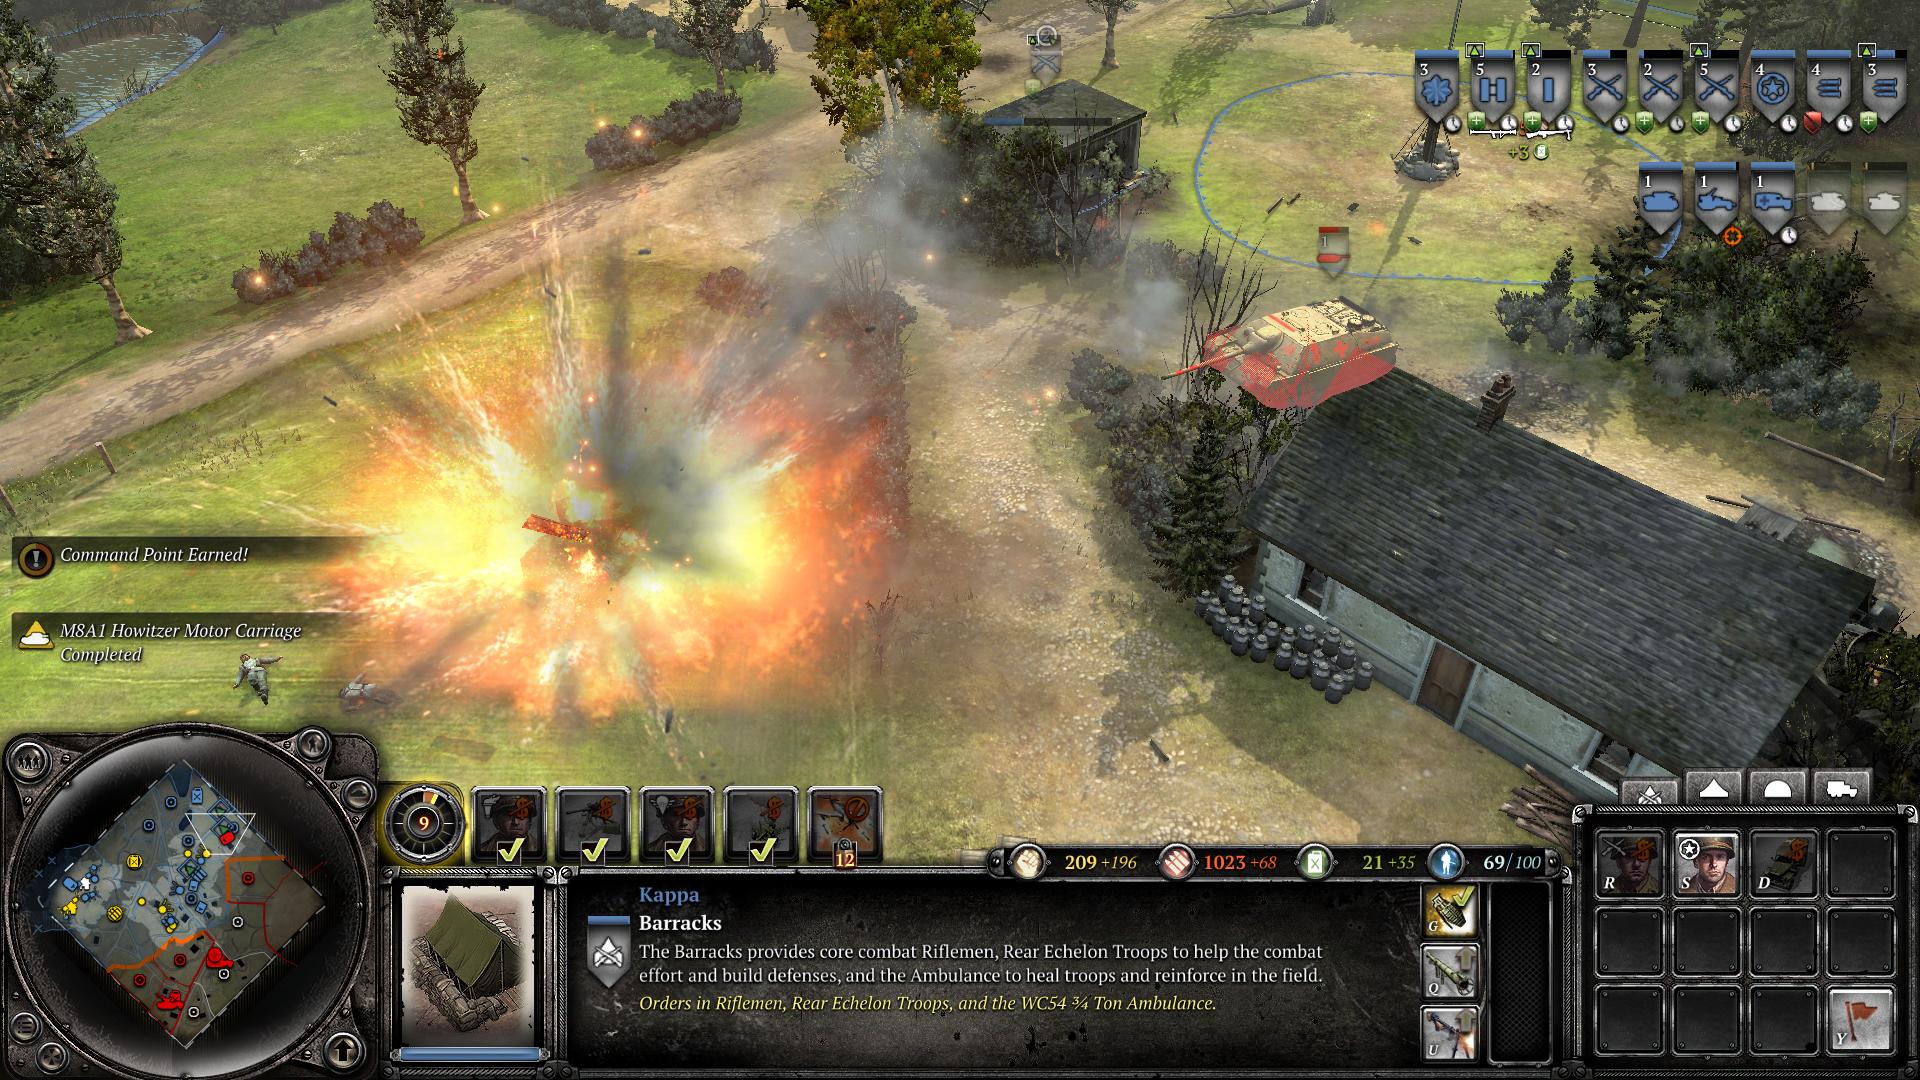 3rd strikecom Company of Heroes 2 The Western Front Armies